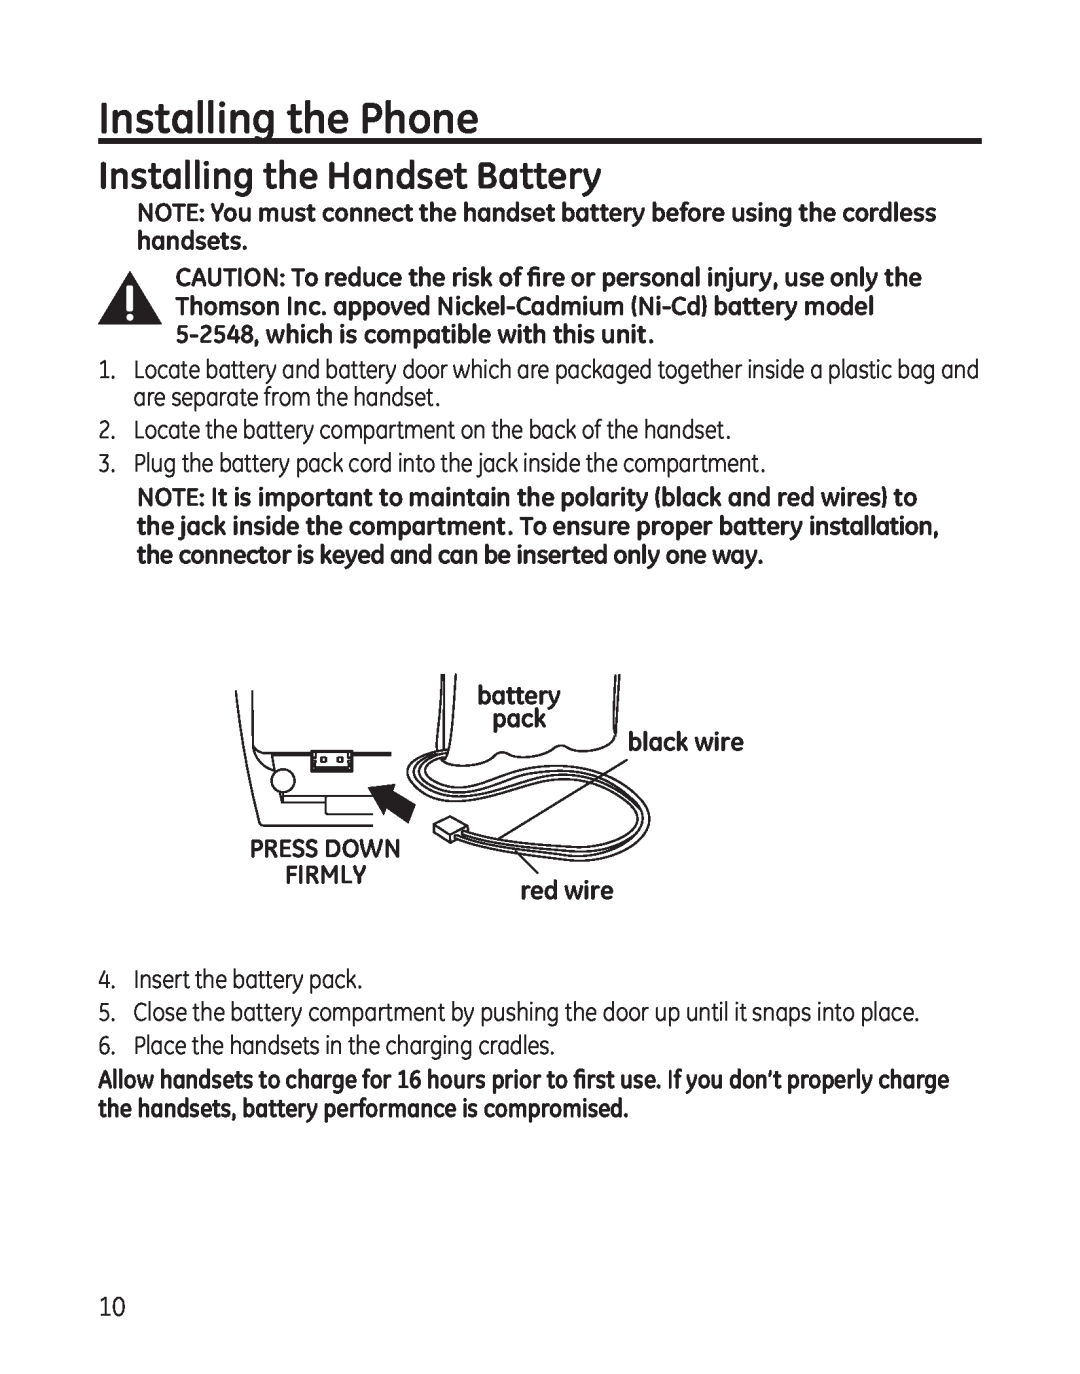 GE 25865 manual Installing the Phone, Installing the Handset Battery, battery pack black wire 